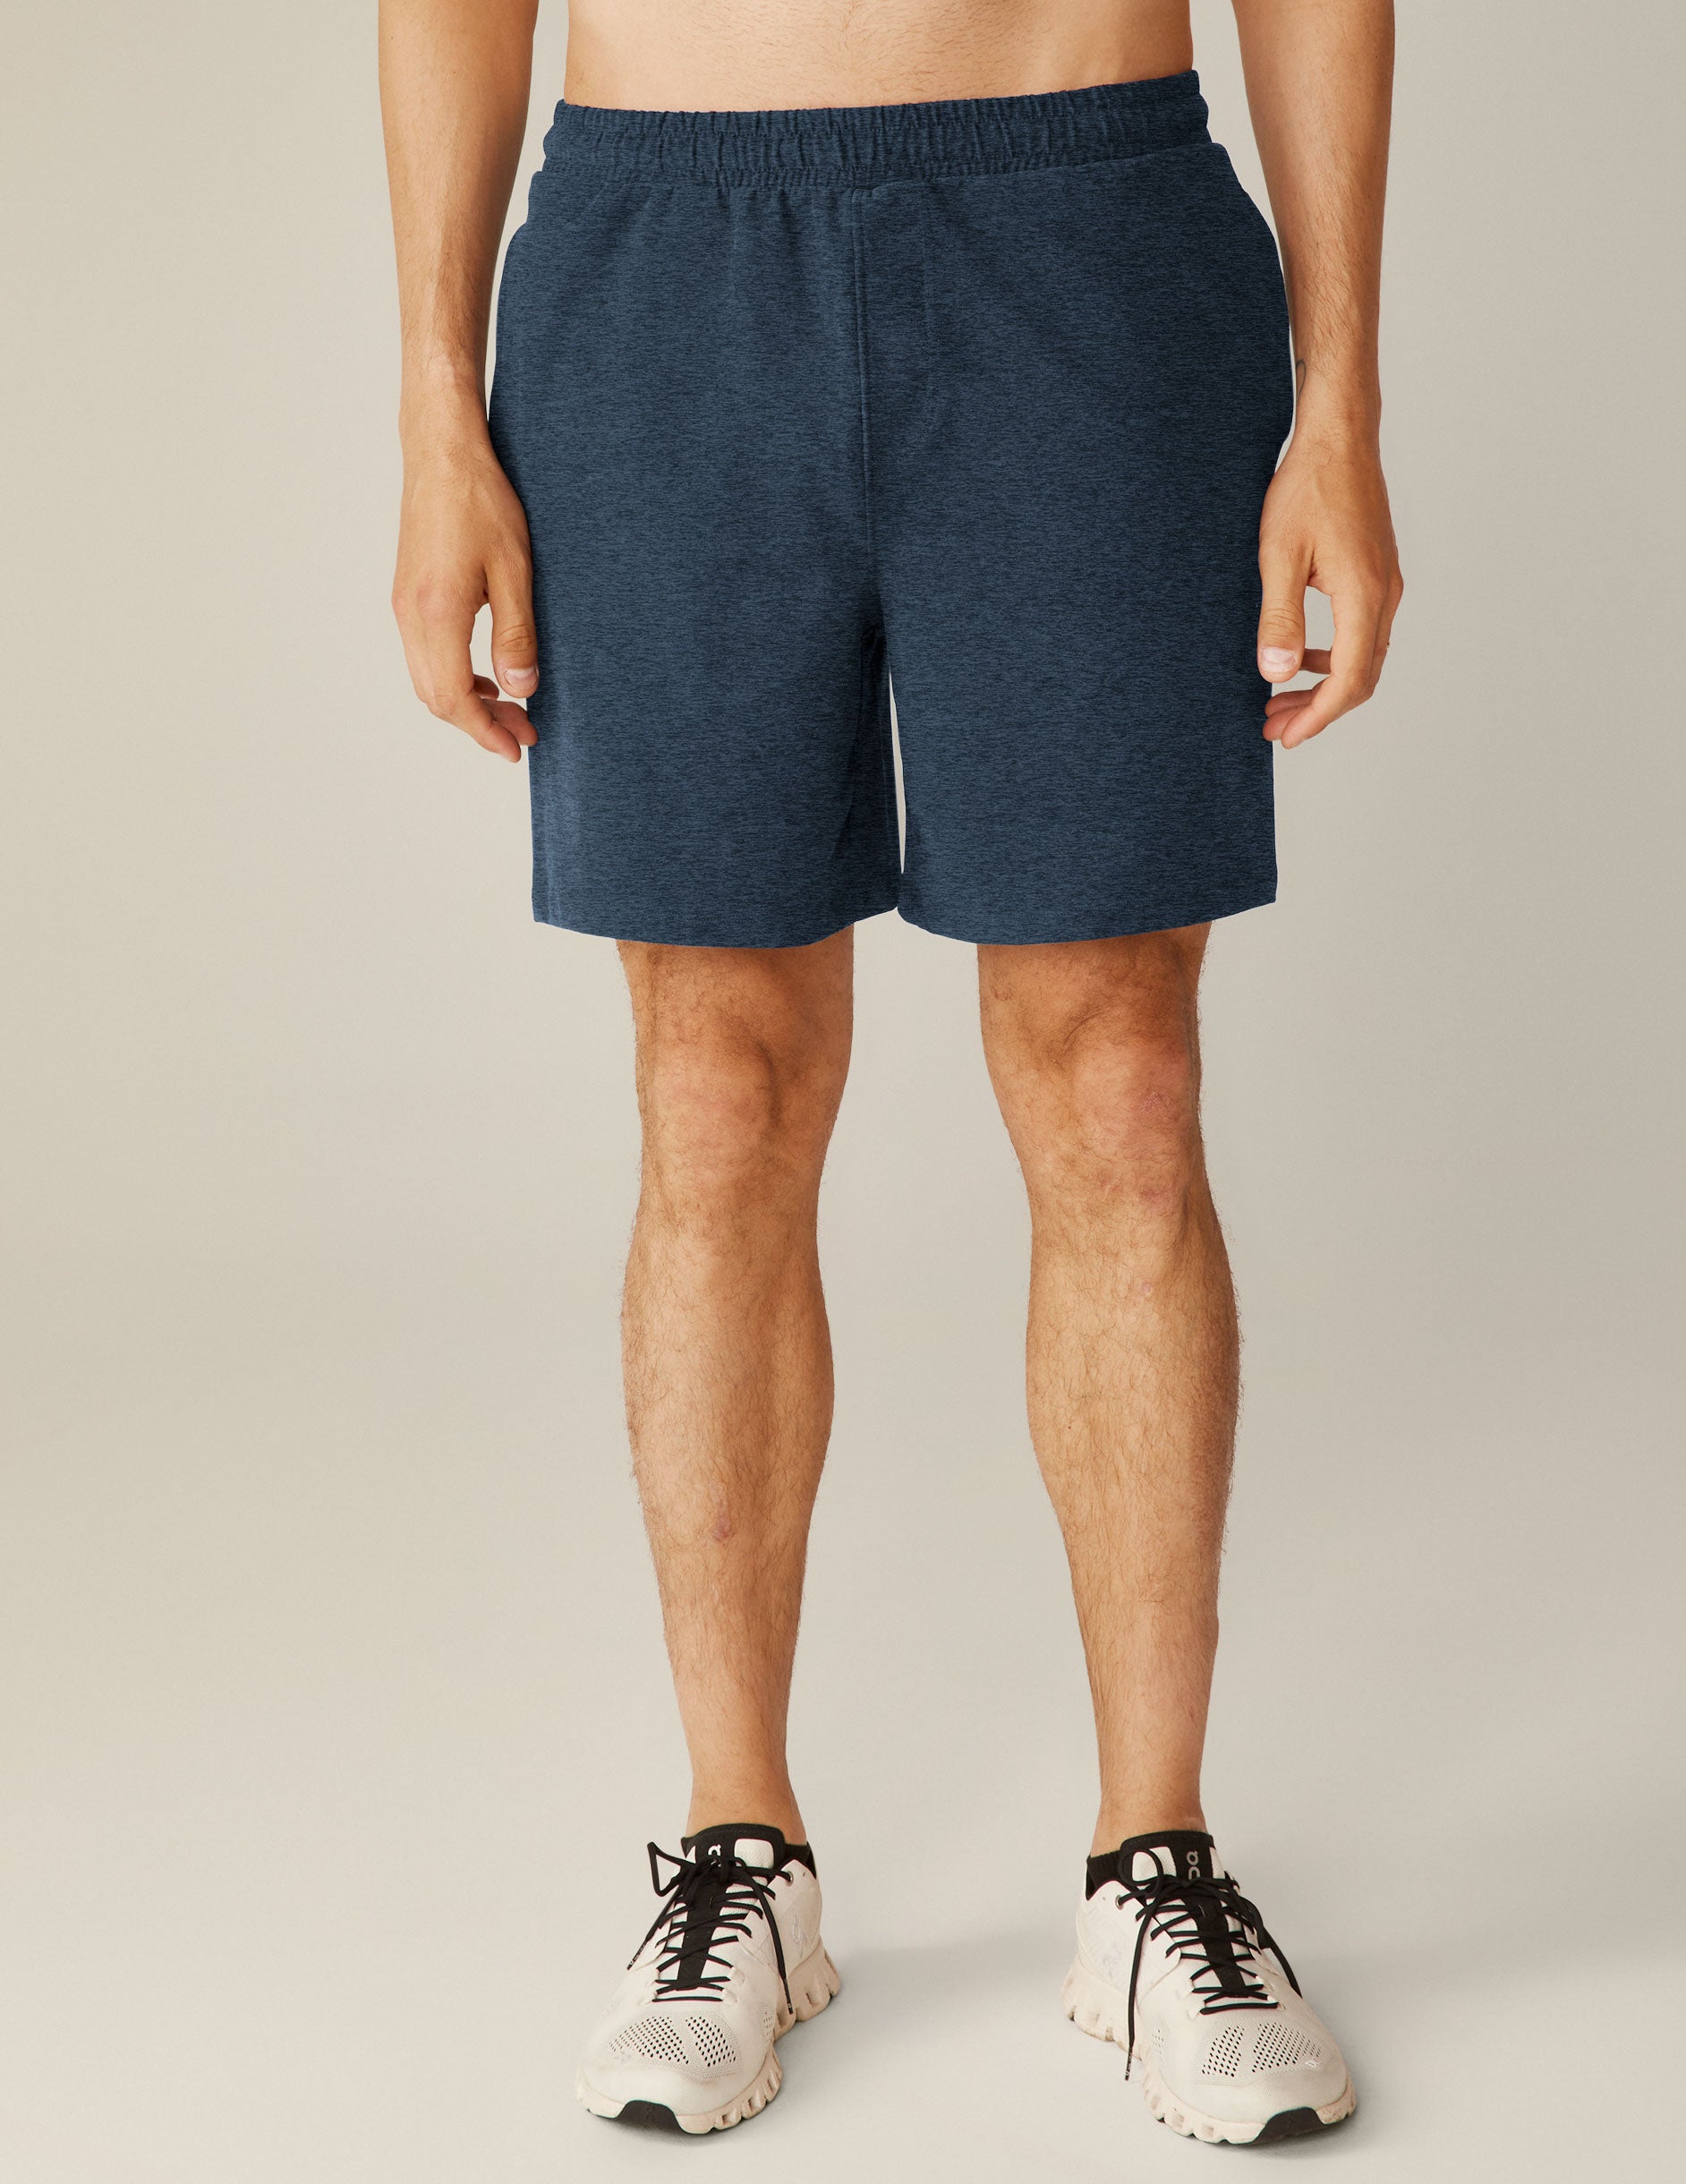 blue relaxed fit men's athleisure shorts with pockets. 